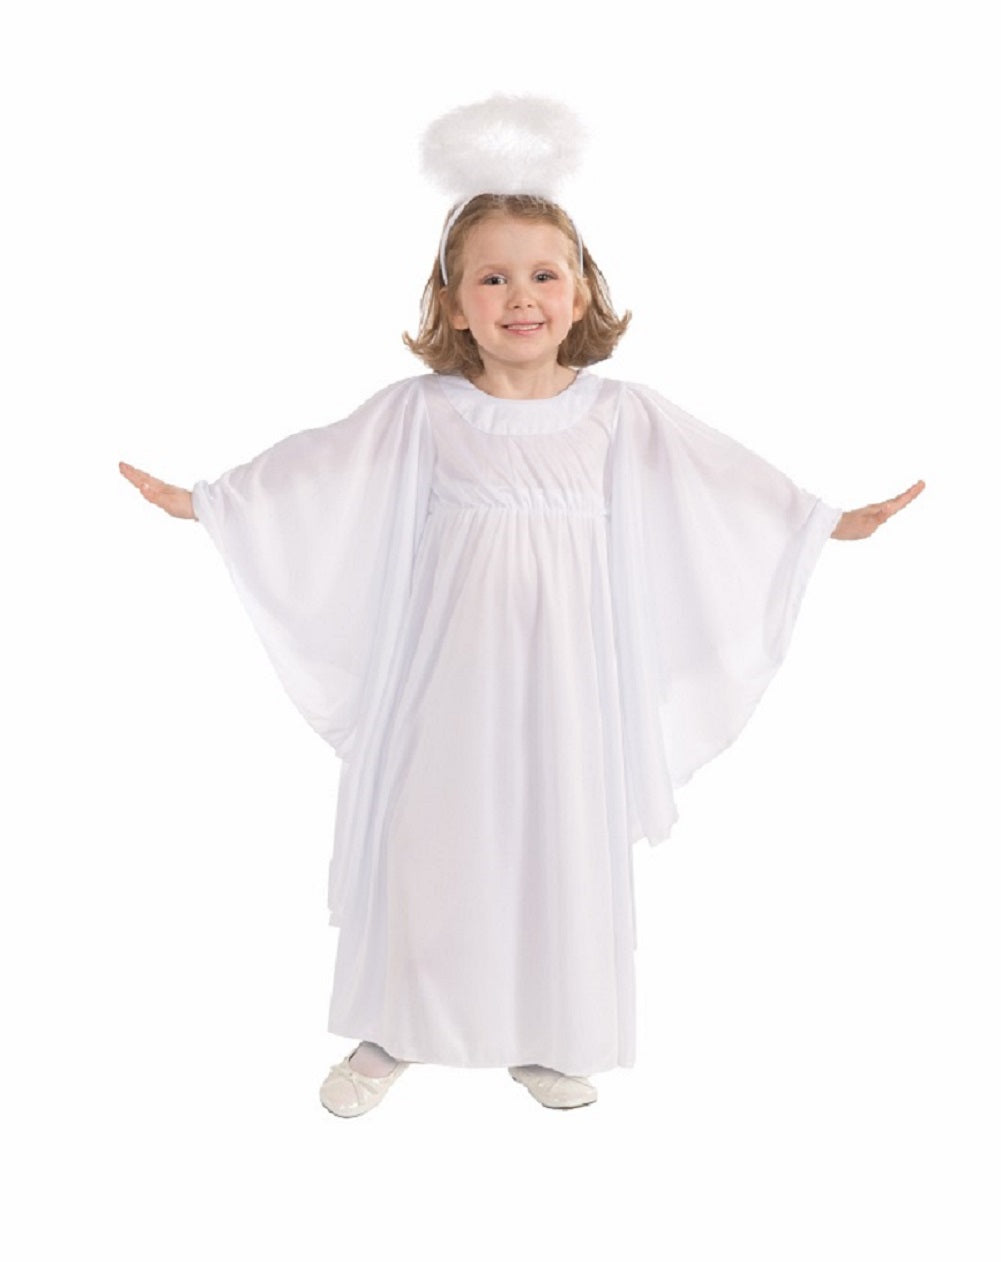 Angel - Liturgical Arms - Long Flowing - Deluxe Costume - Child - 4 Sizes